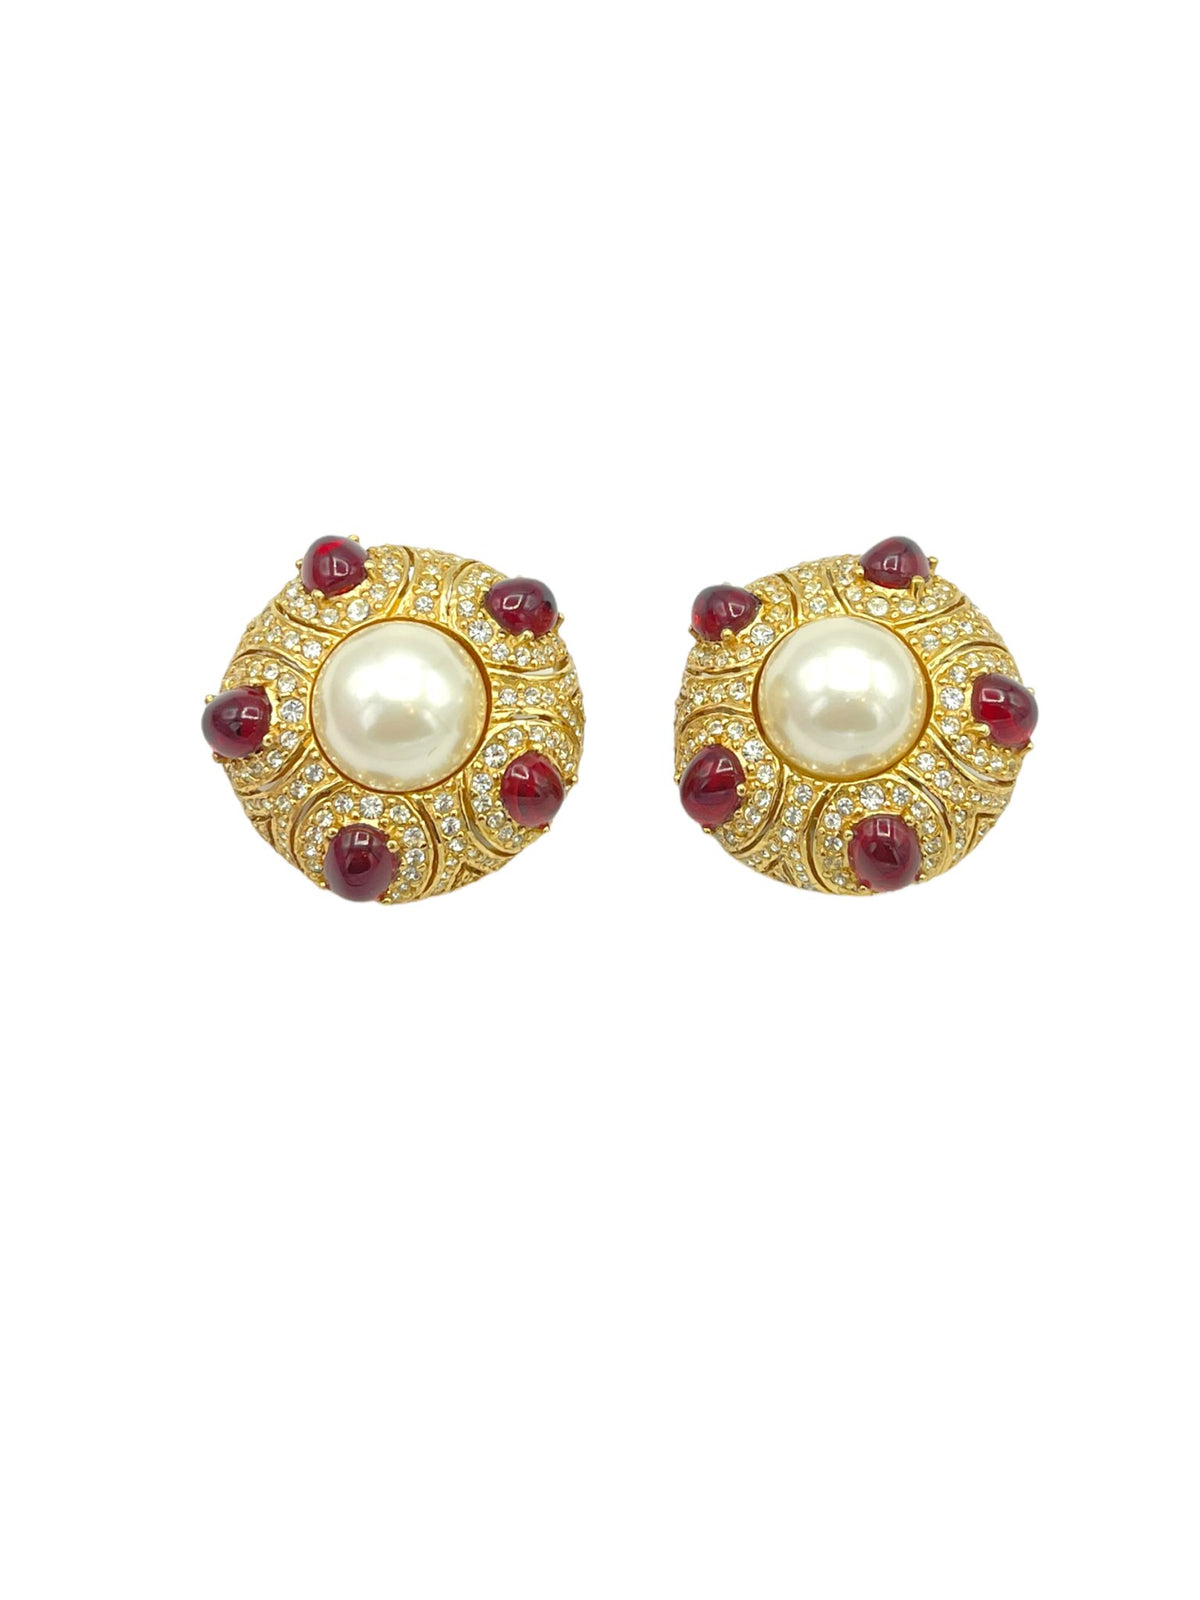 Ciner Gold Ruby Cabochon & Pearl Vintage Clip-On Earrings - 24 Wishes Vintage Jewelry